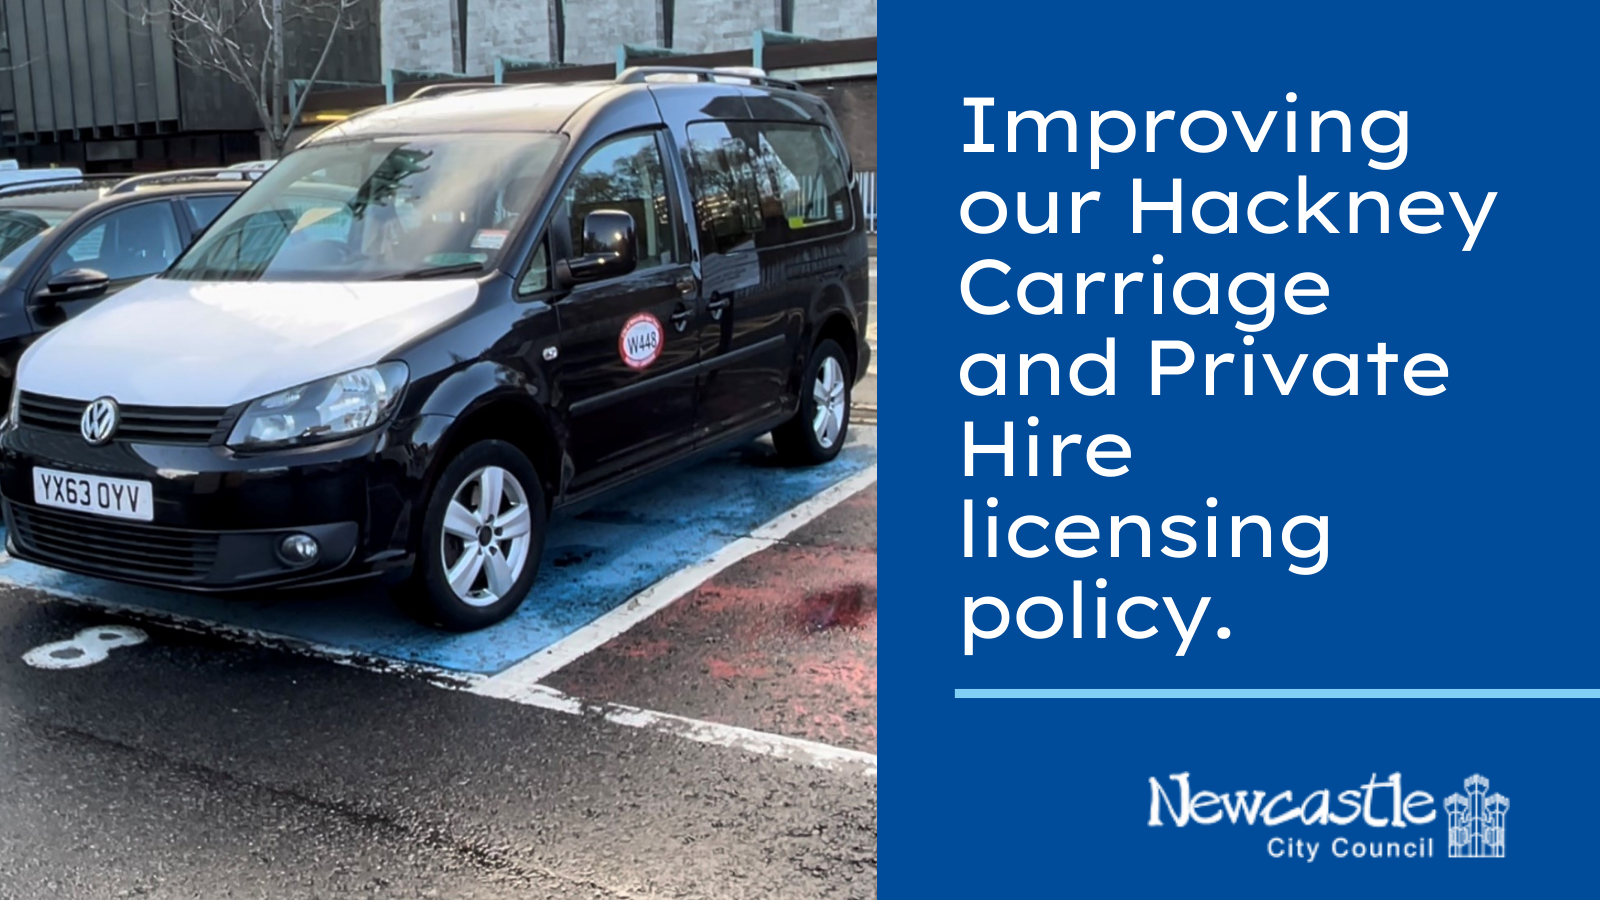 Improving our Hackney Carriage and Private Hire licensing policy.